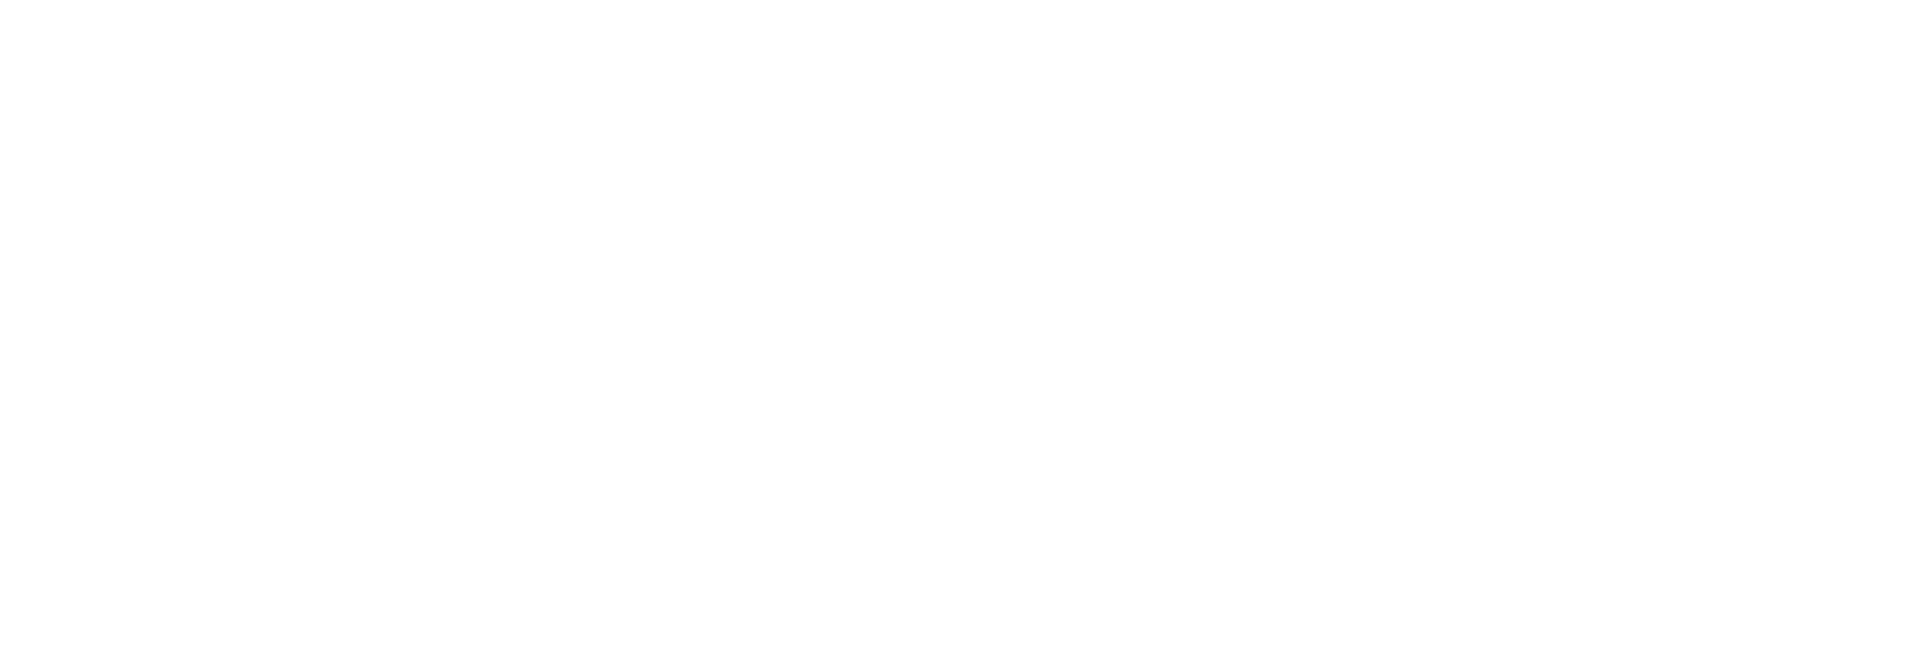 Cobble and Trouble